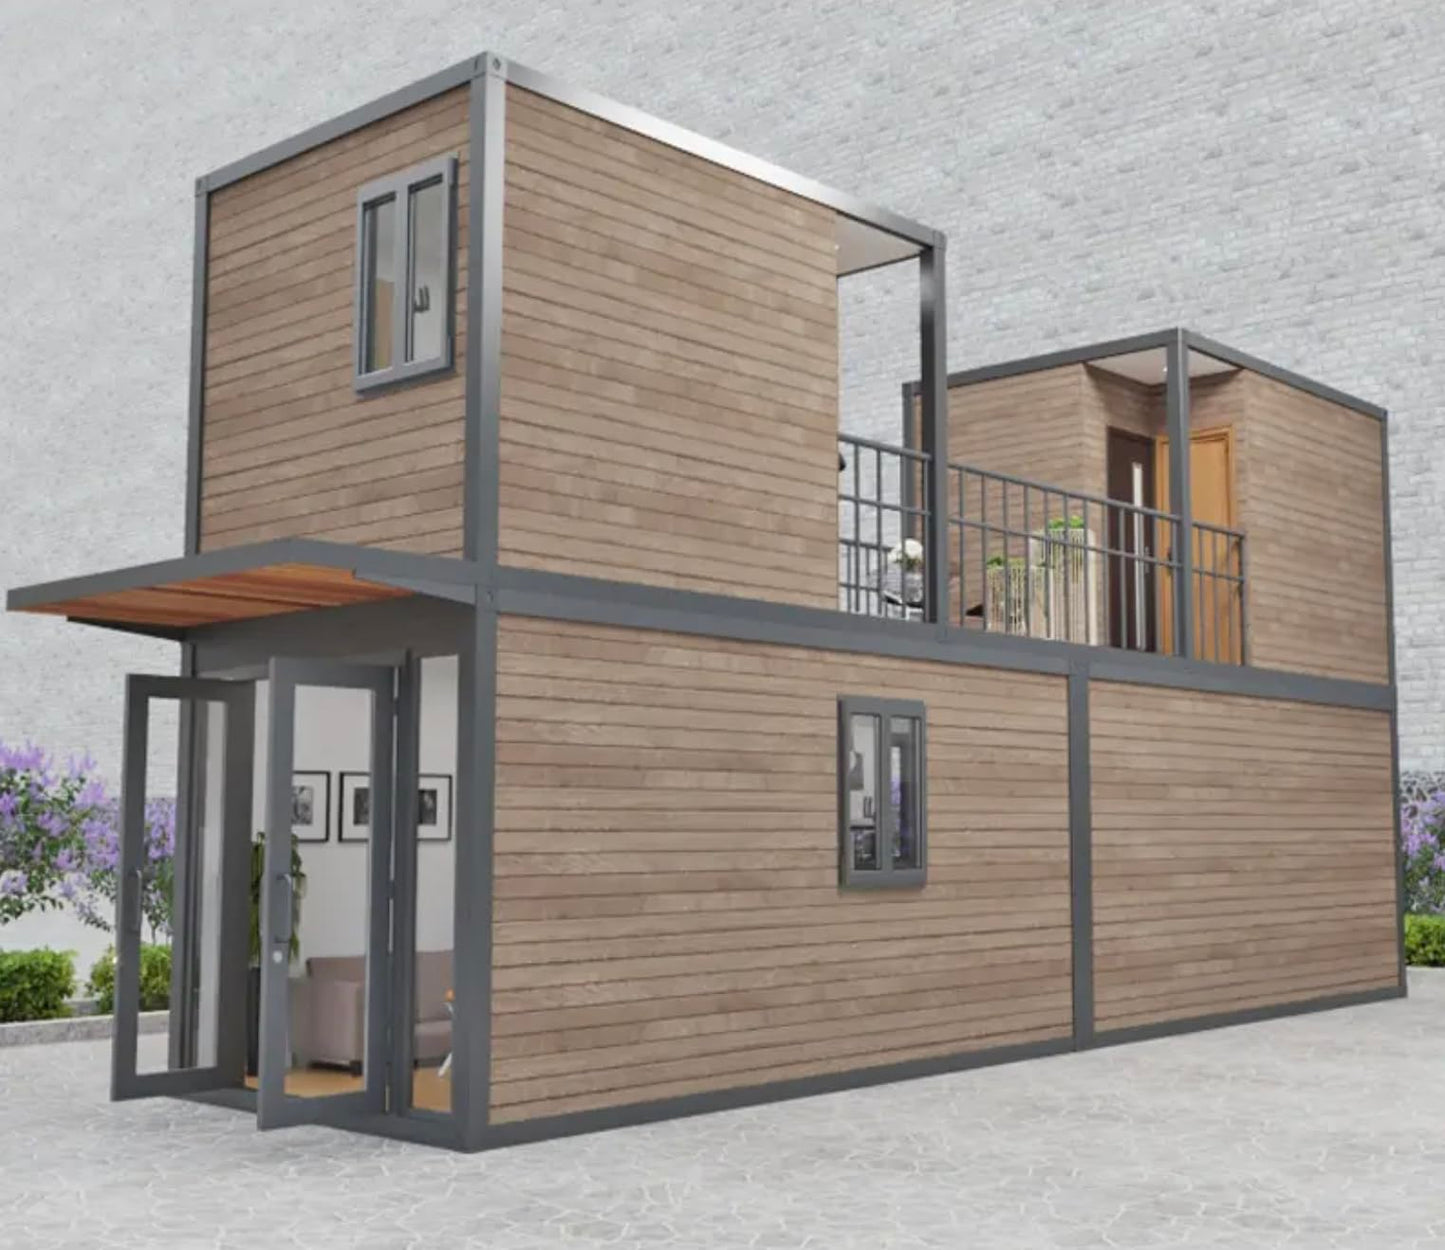 Luxury Two-Story 3-Bedroom prefab Container Homes with Bathroom, prefabricated Living Expandable Container House, Portable Family Foldable Container Home, Luxury Kitchen Cabinet.